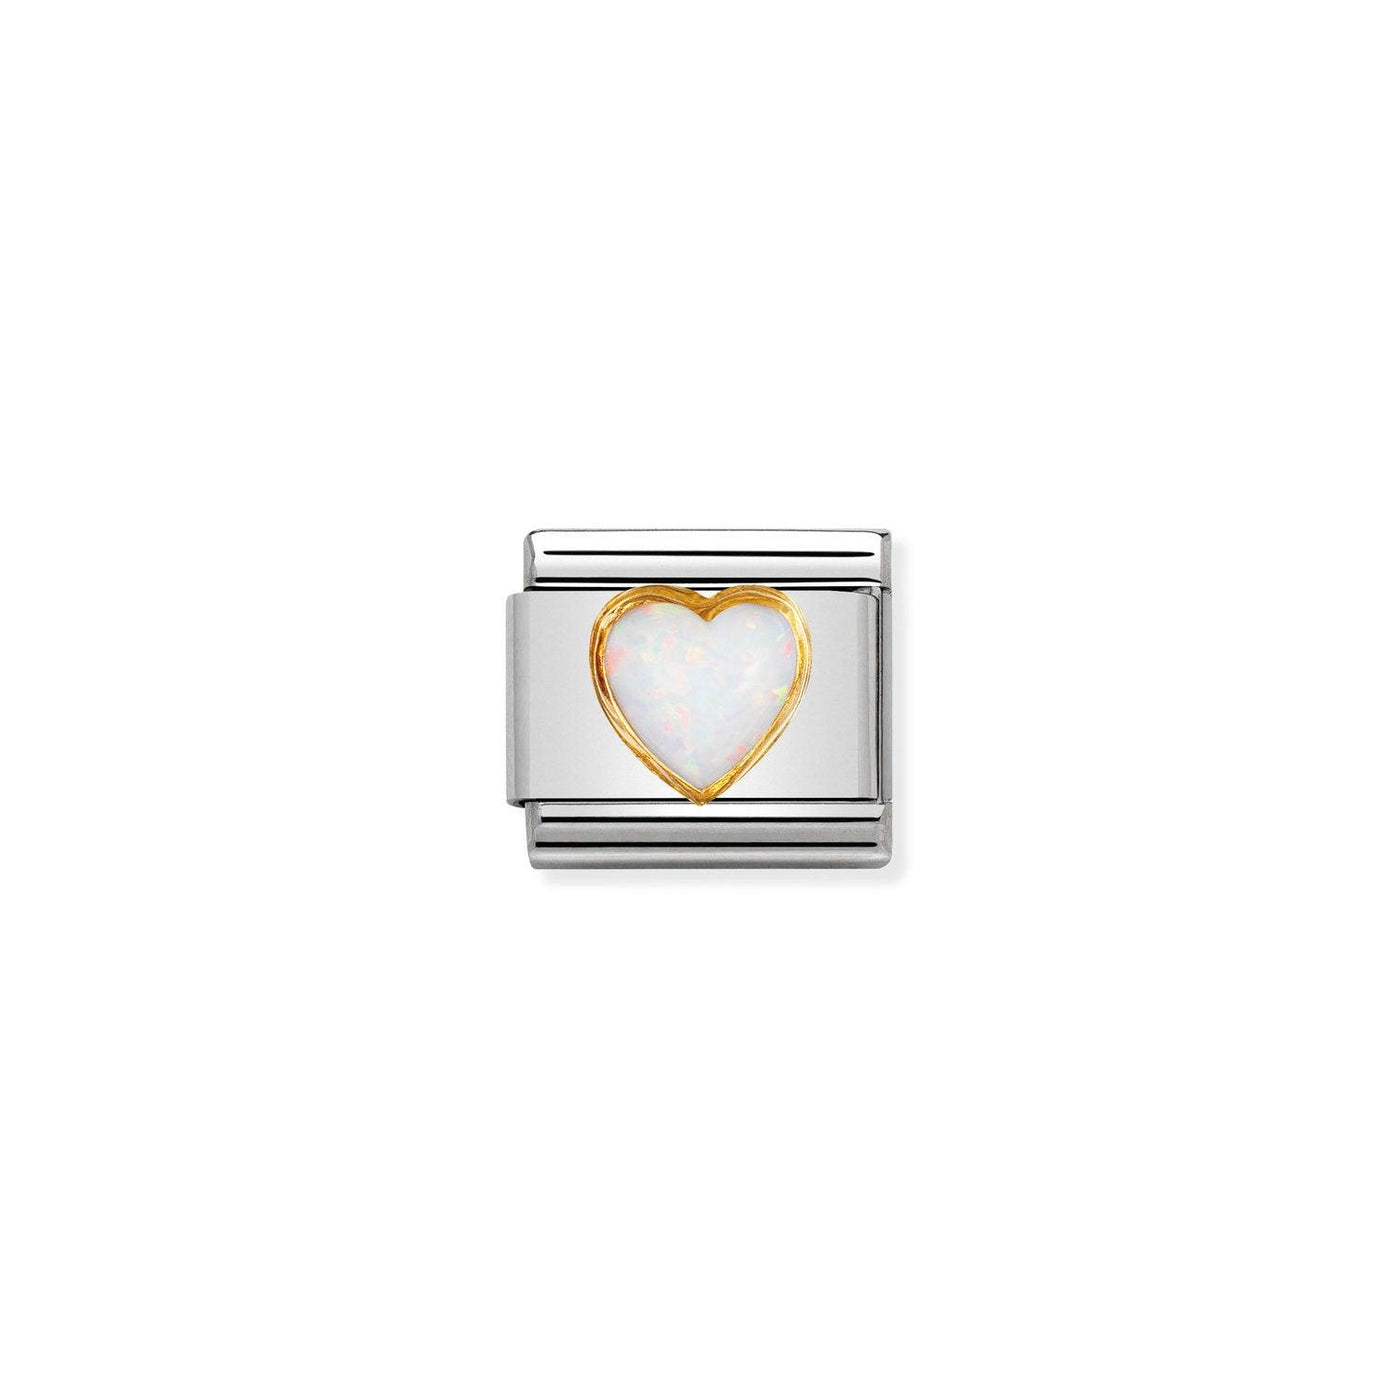 Nomination Classic Opal Heart in 18ct Gold Charm - Rococo Jewellery